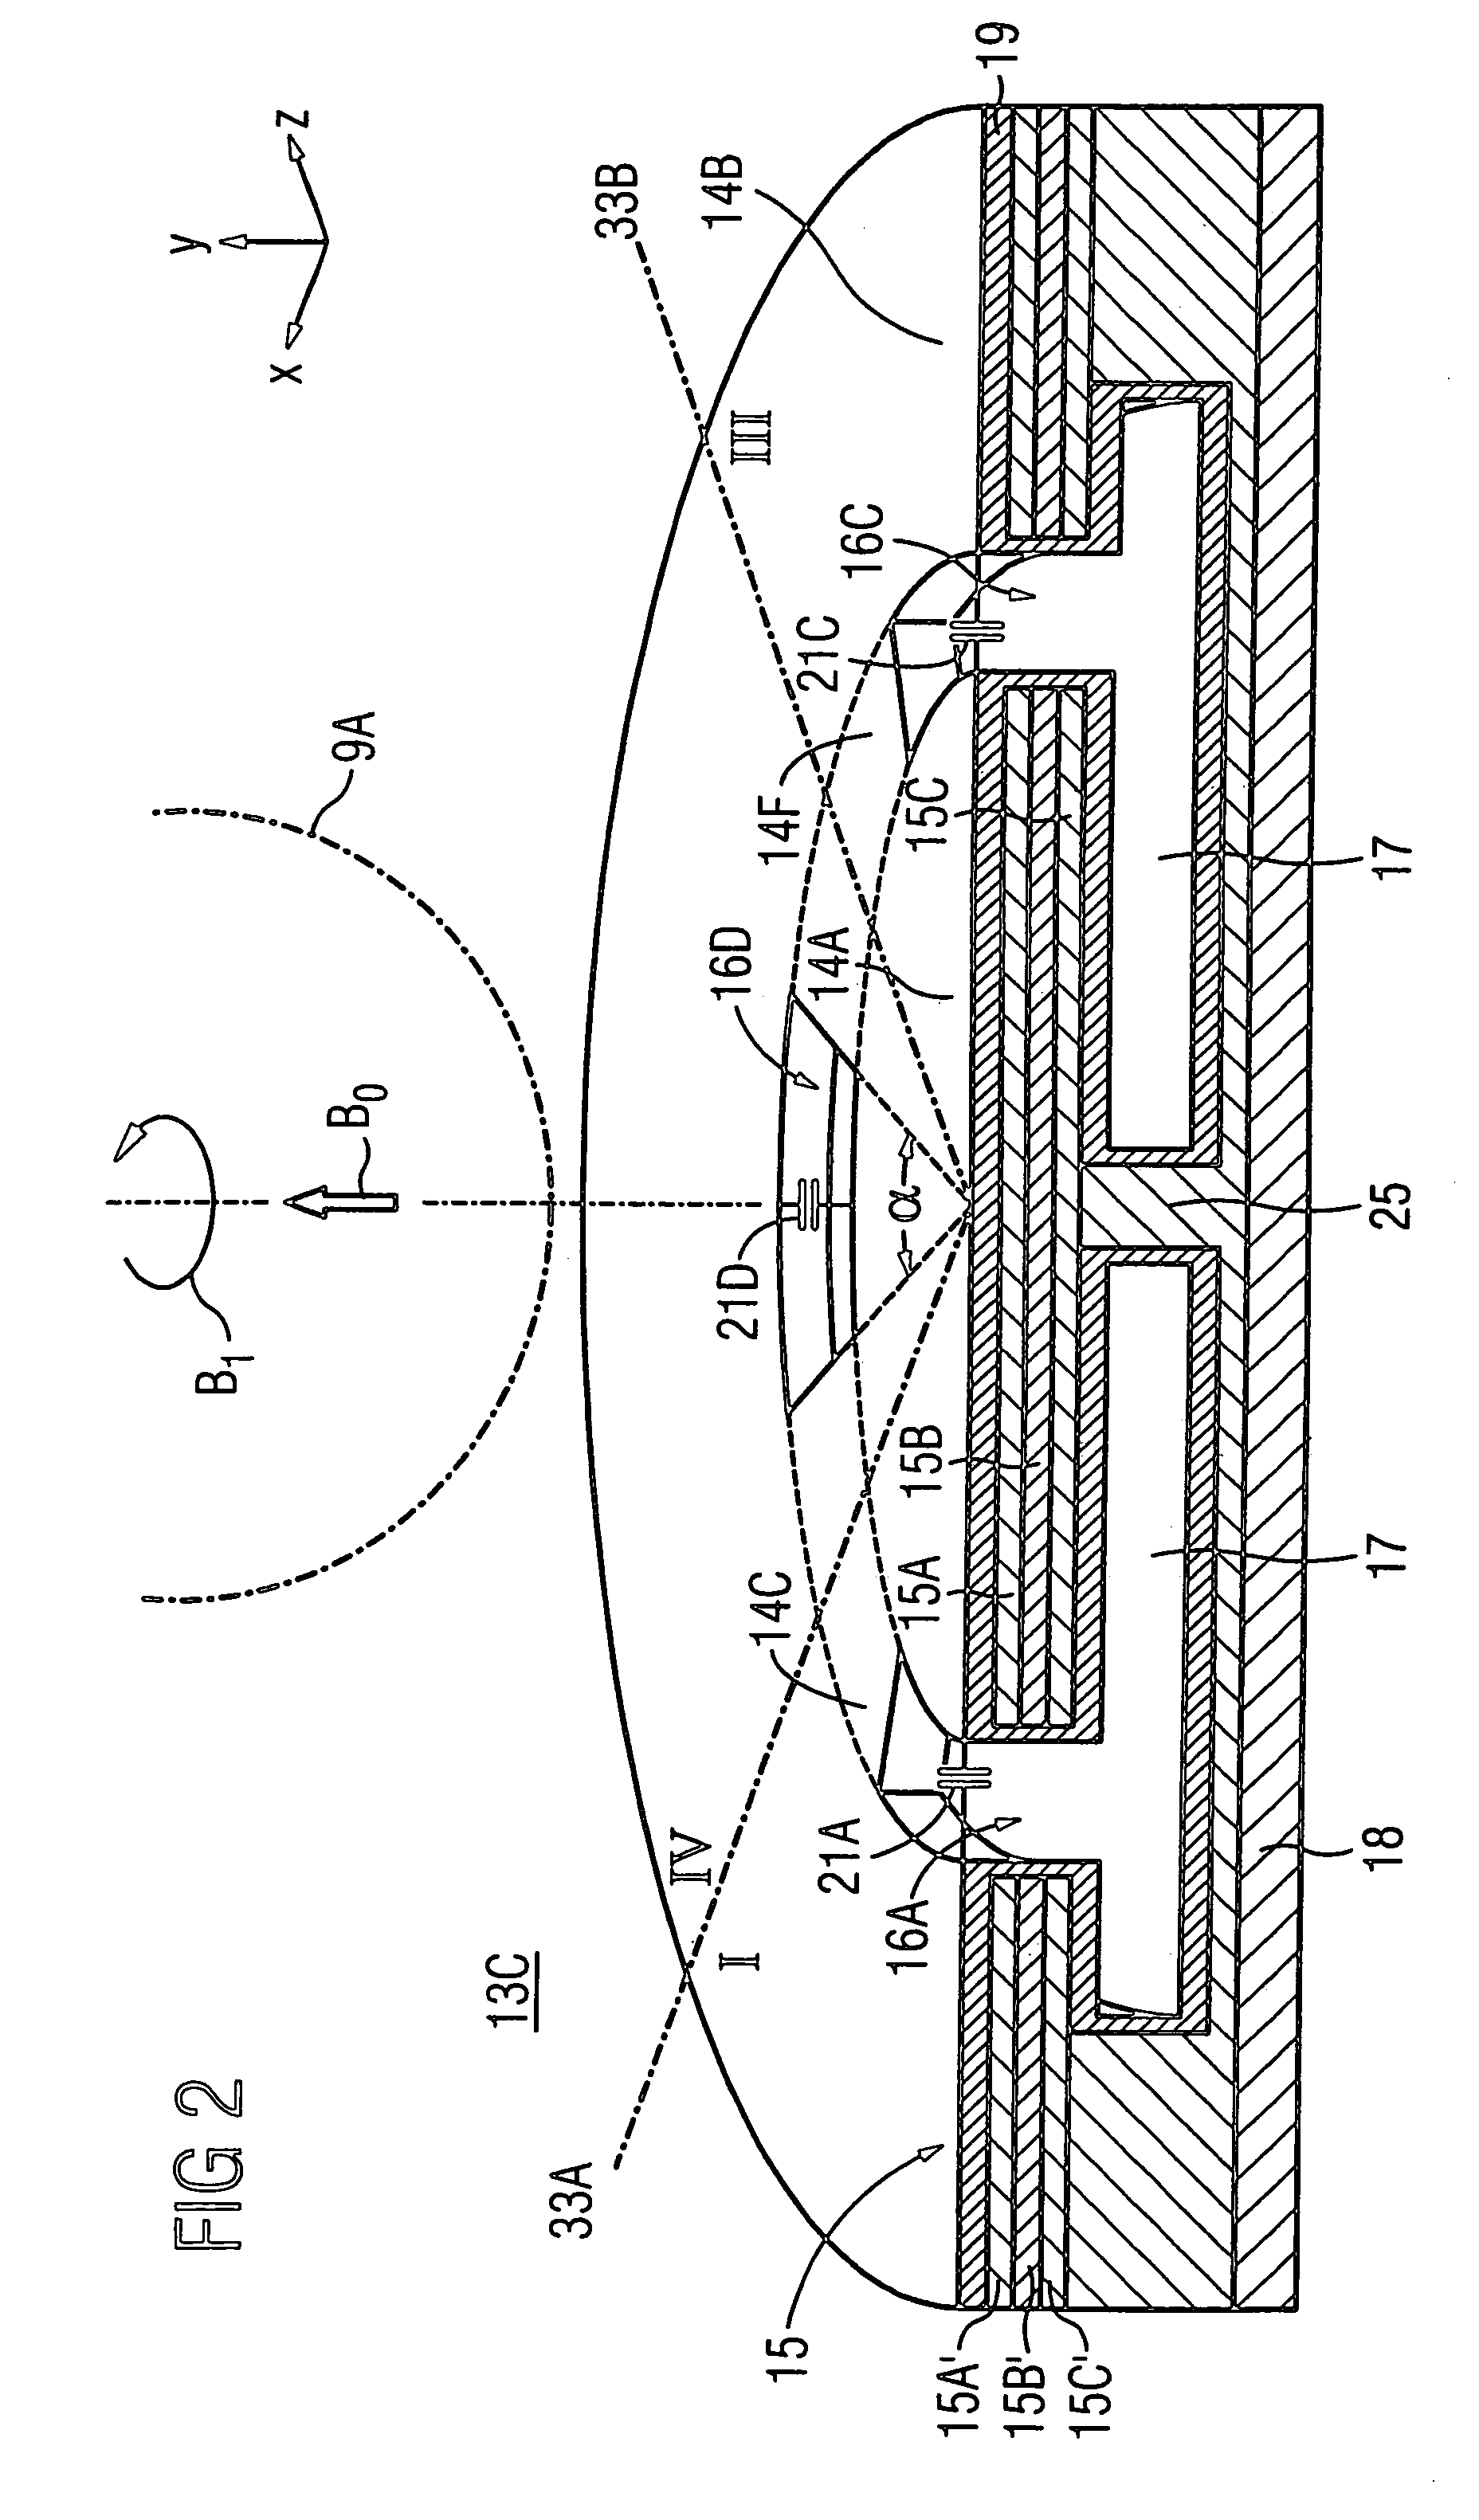 Time-variable magnetic fields generator and magnetic resonance apparatus embodying same